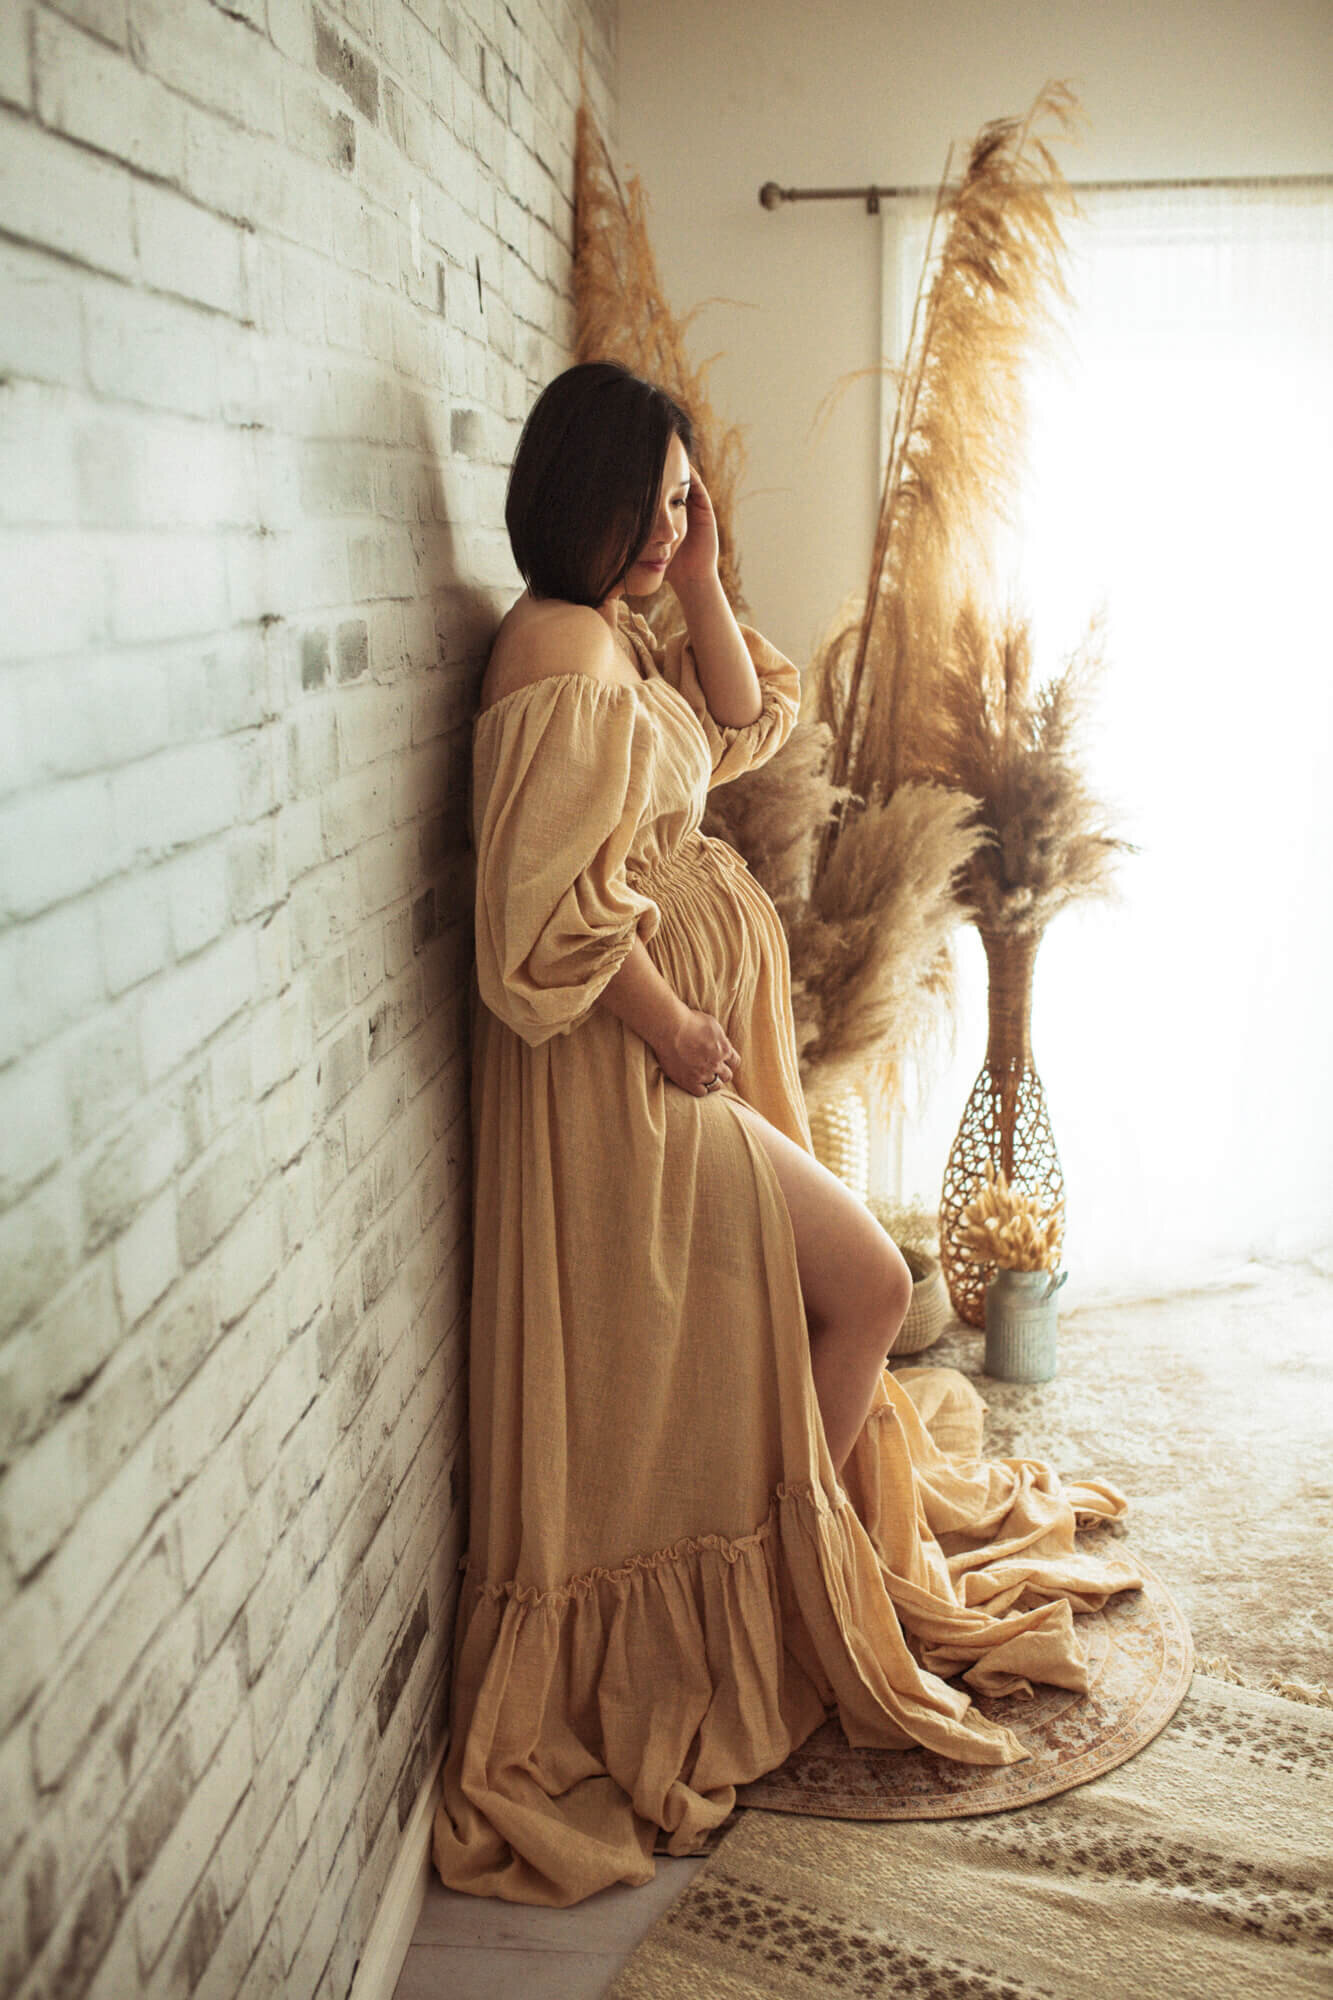 Pregnant woman standing in Reclamation gown with pampas grass